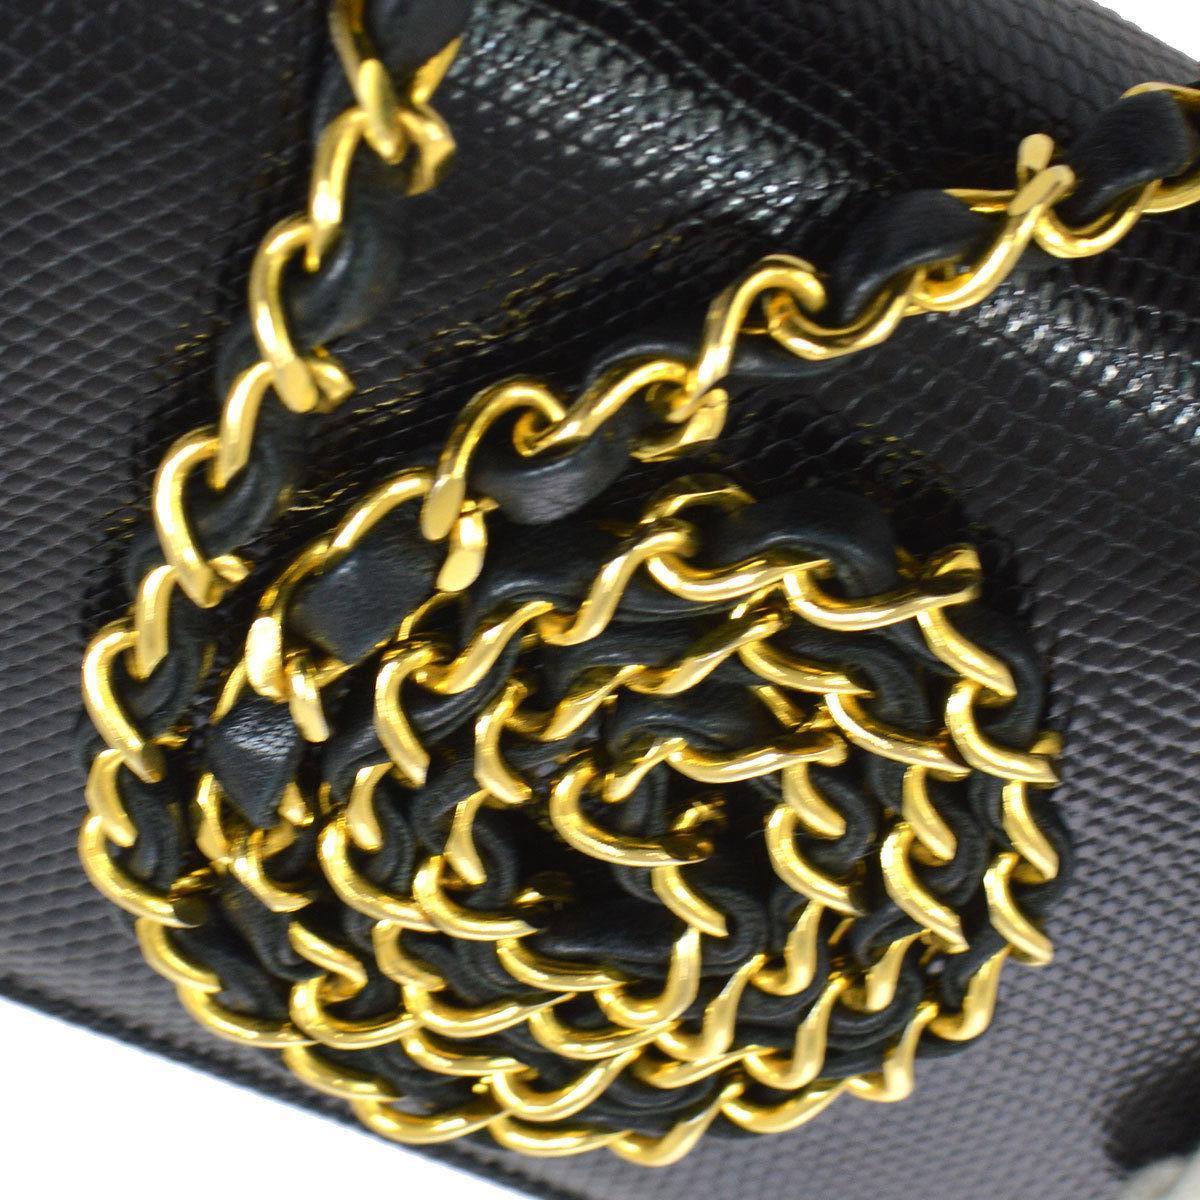 Chanel Black Lizard Gold WOC Wallet on Chain Clutch Evening Flap Shoulder Bag

Lizard
Gold tone hardware
Leather lining
Date code present
Made in France
Shoulder strap drop 17